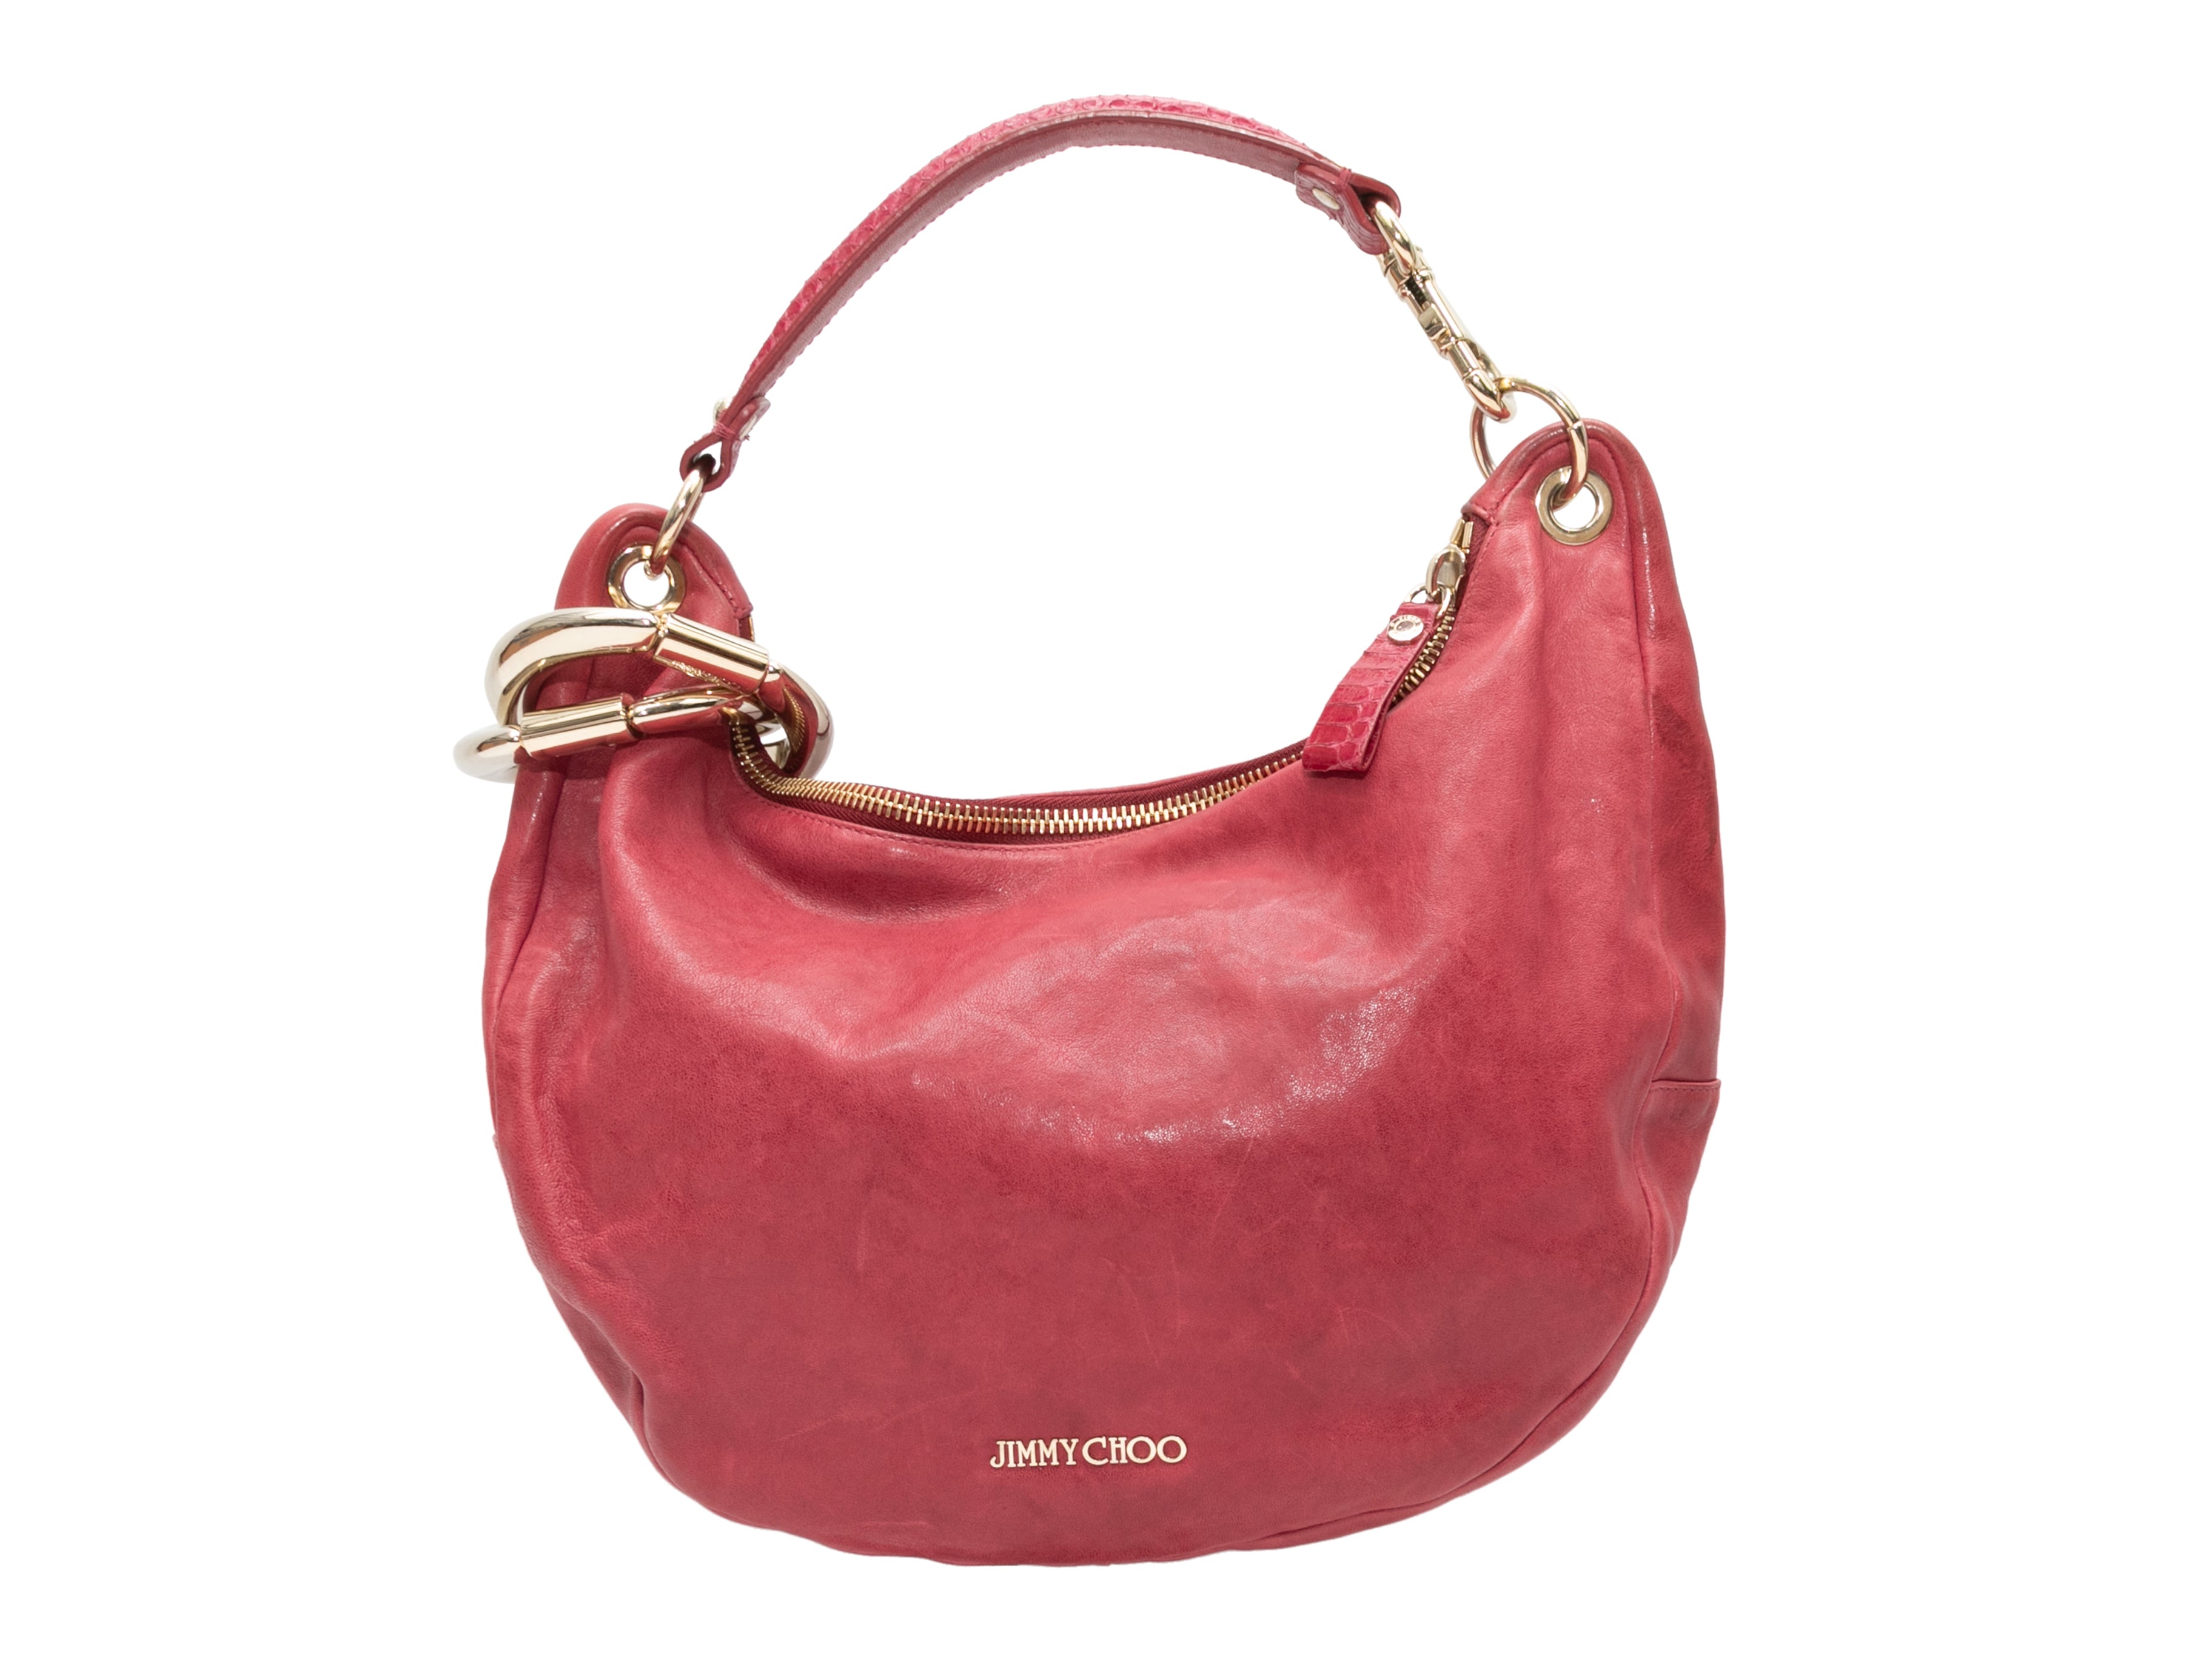 Jimmy choo 6 colors available hand bags